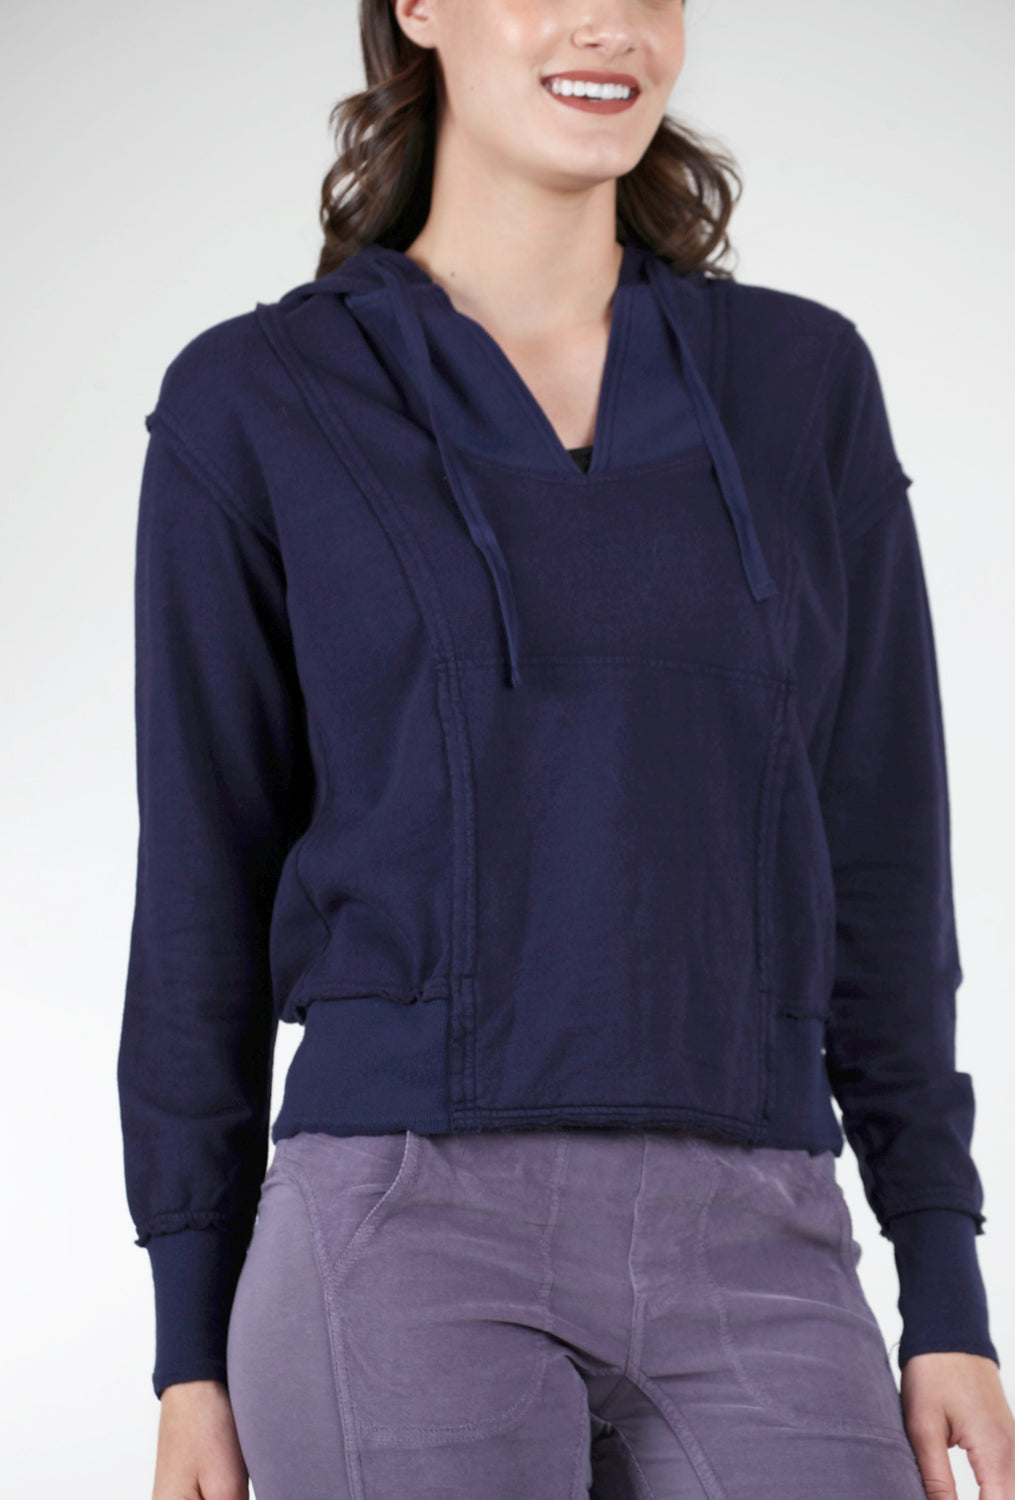 Wearables by XCVI Rosalyn Hoodie, Champion Pigment 